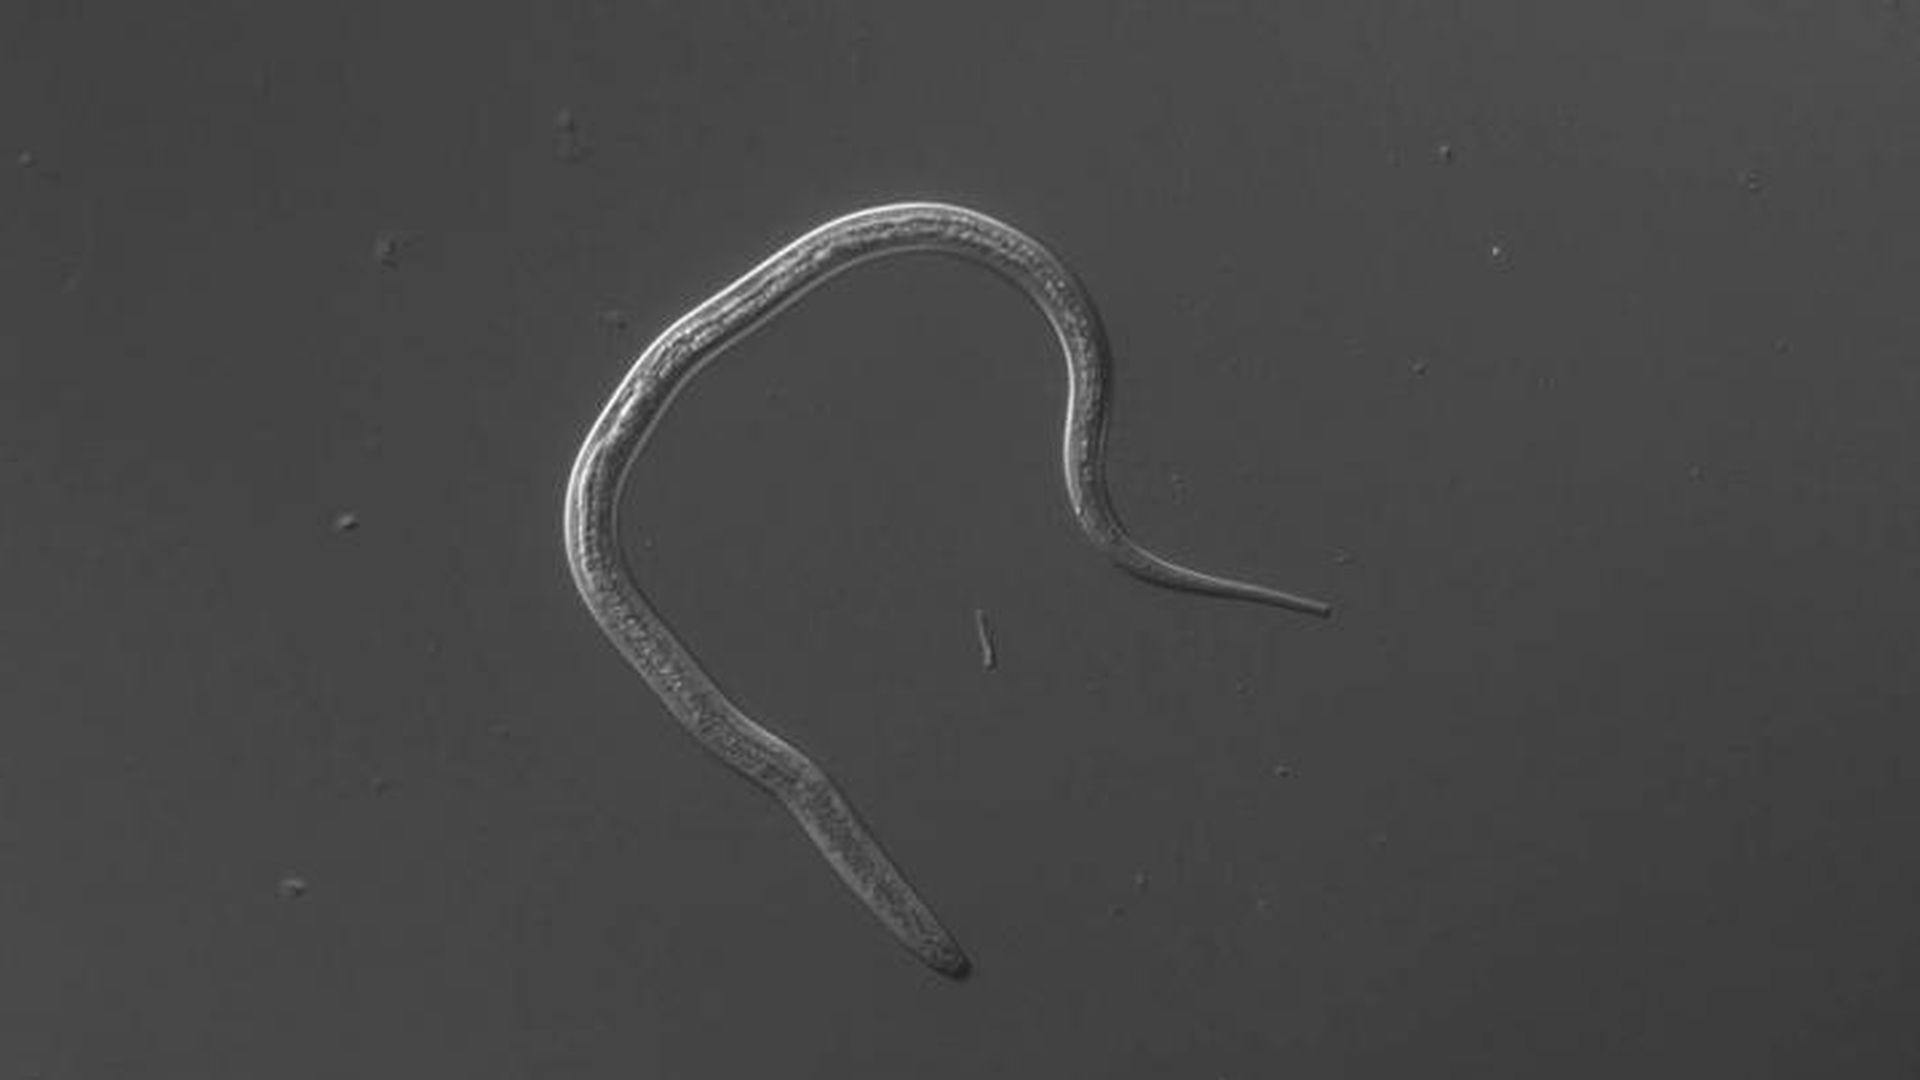 Finding a Lethal Parasite's Vulnerabilities